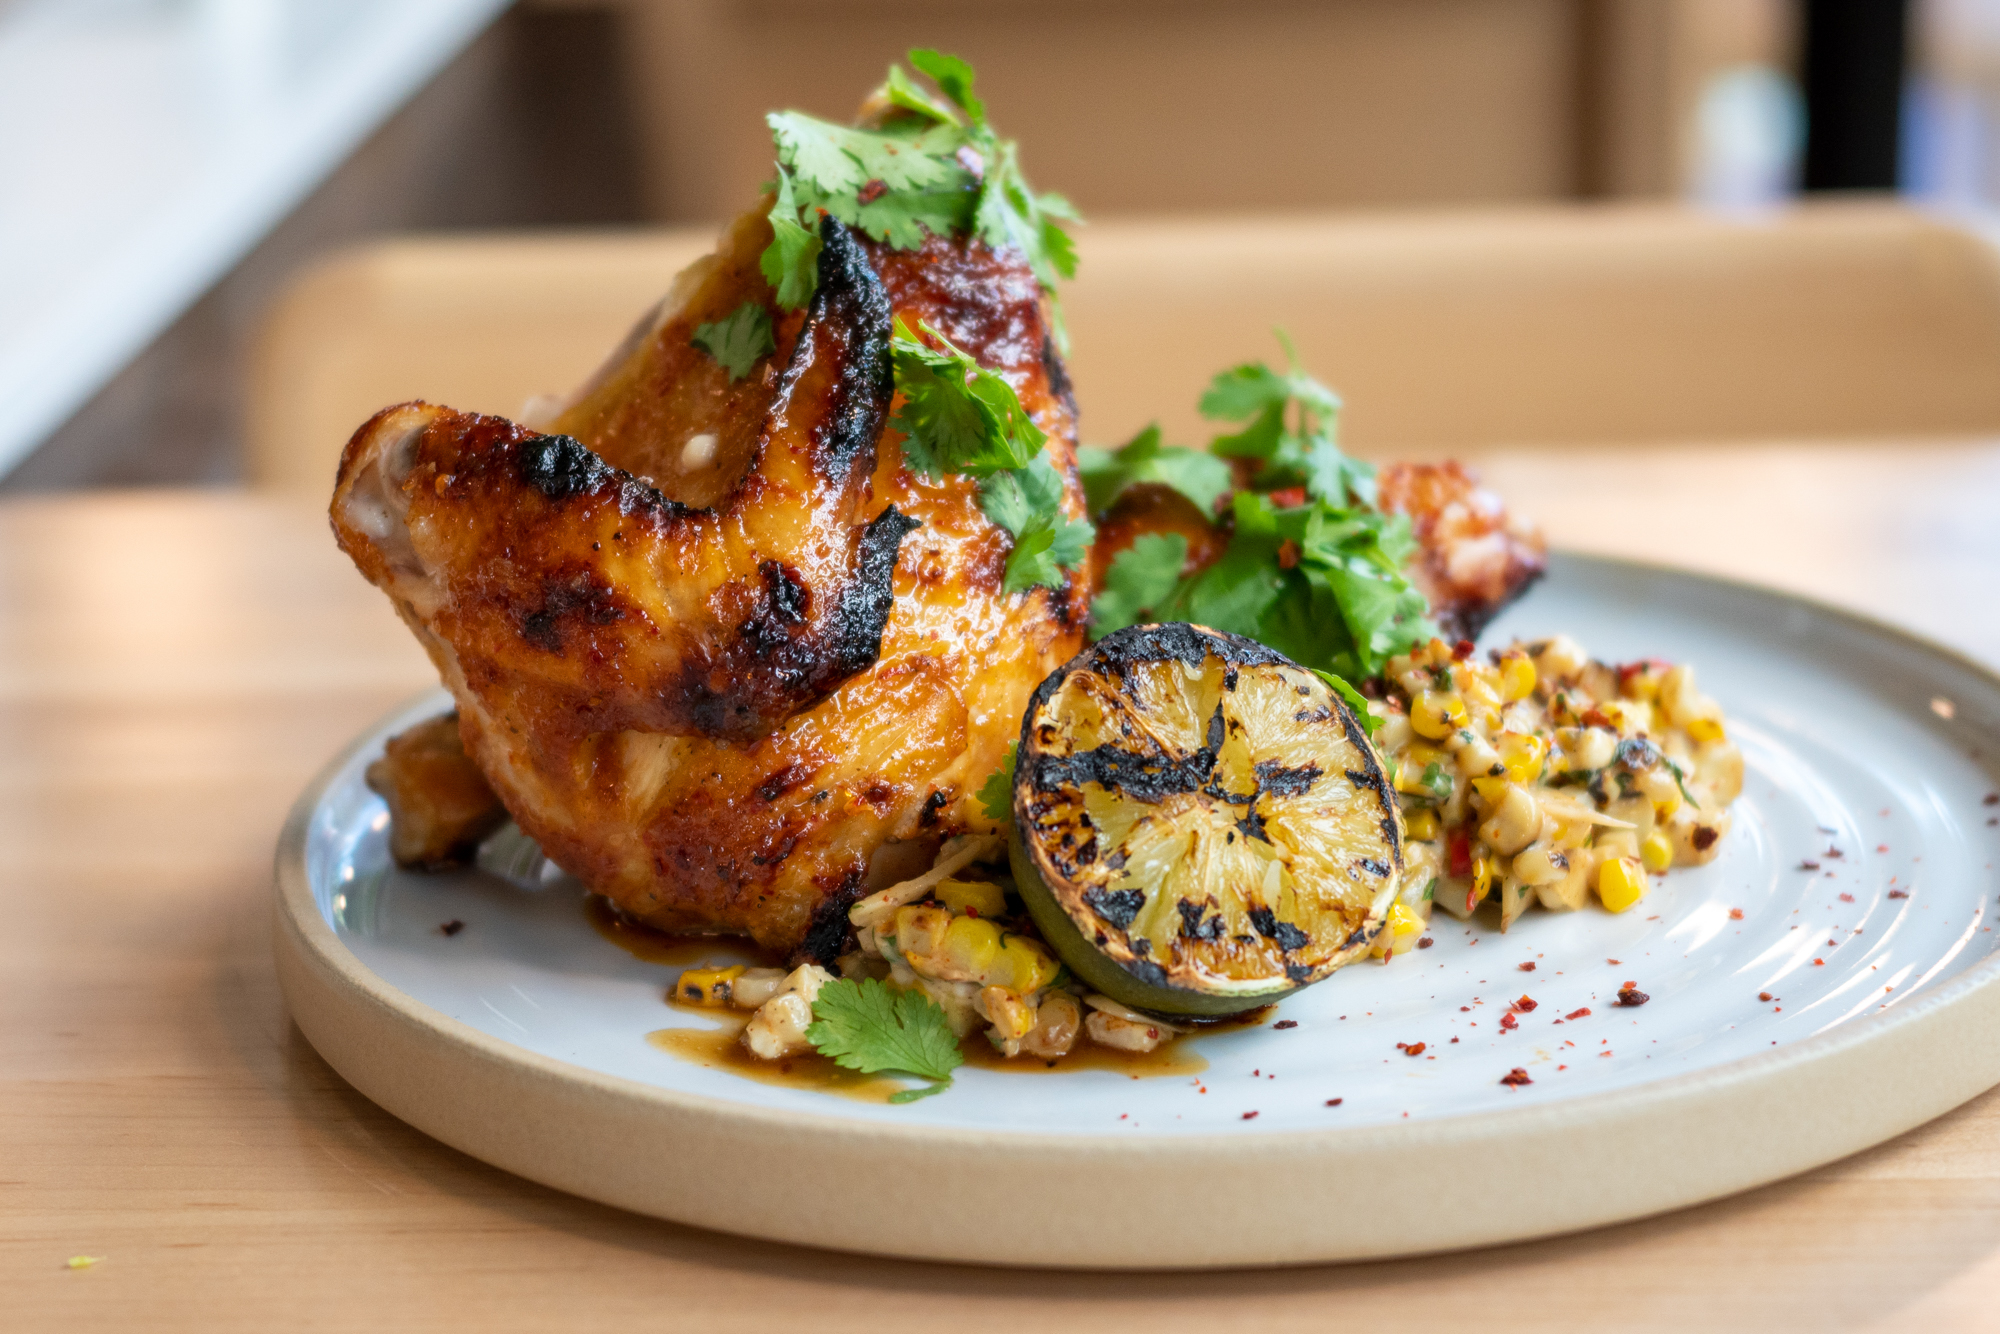 A plate of half smoked chicken with grilled lime and corn, drizzled with green herbs.